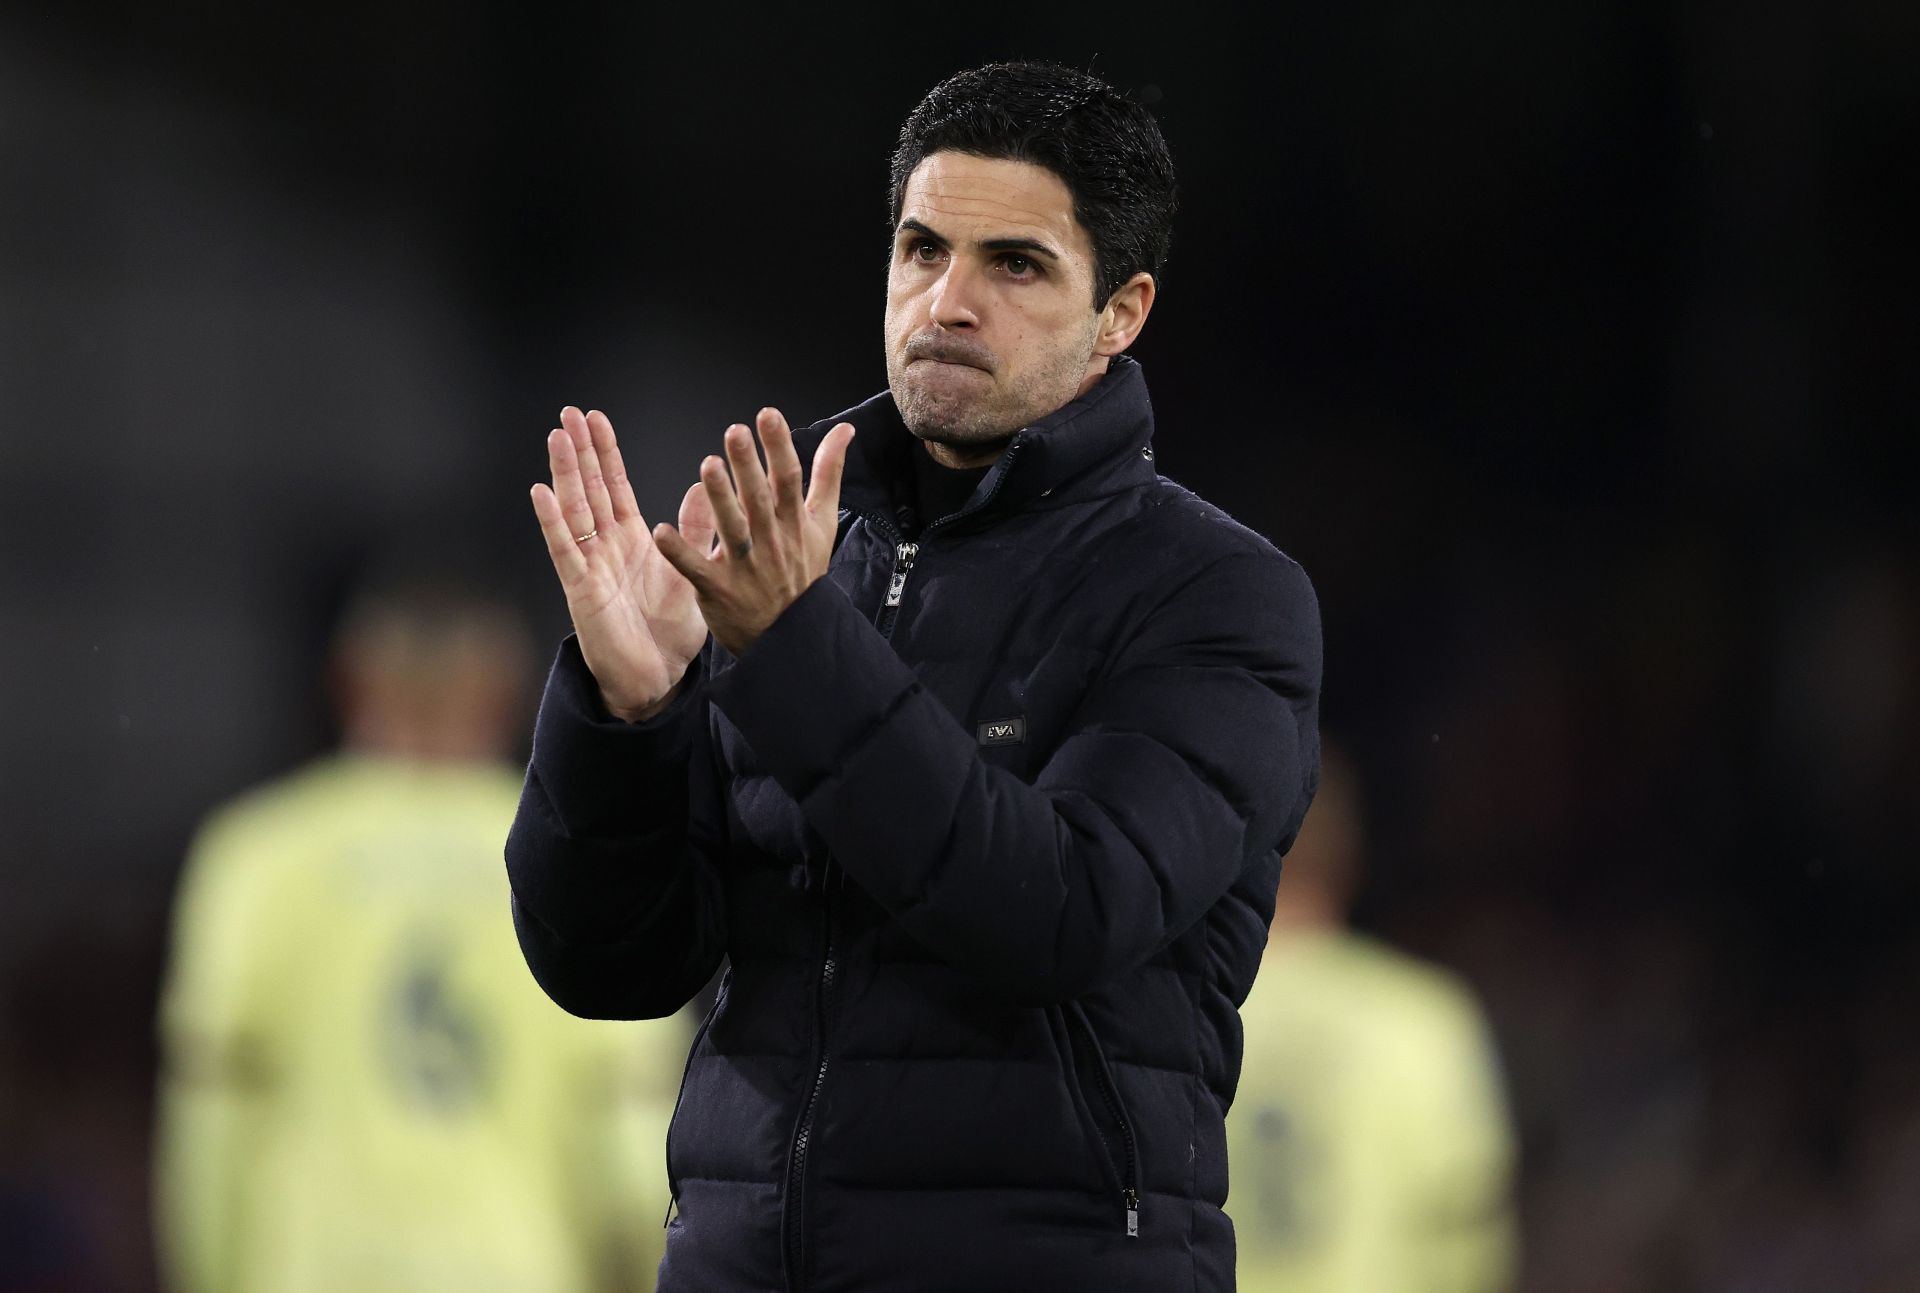 Arsenal manager Mikel Arteta could have a busy summer ahead.